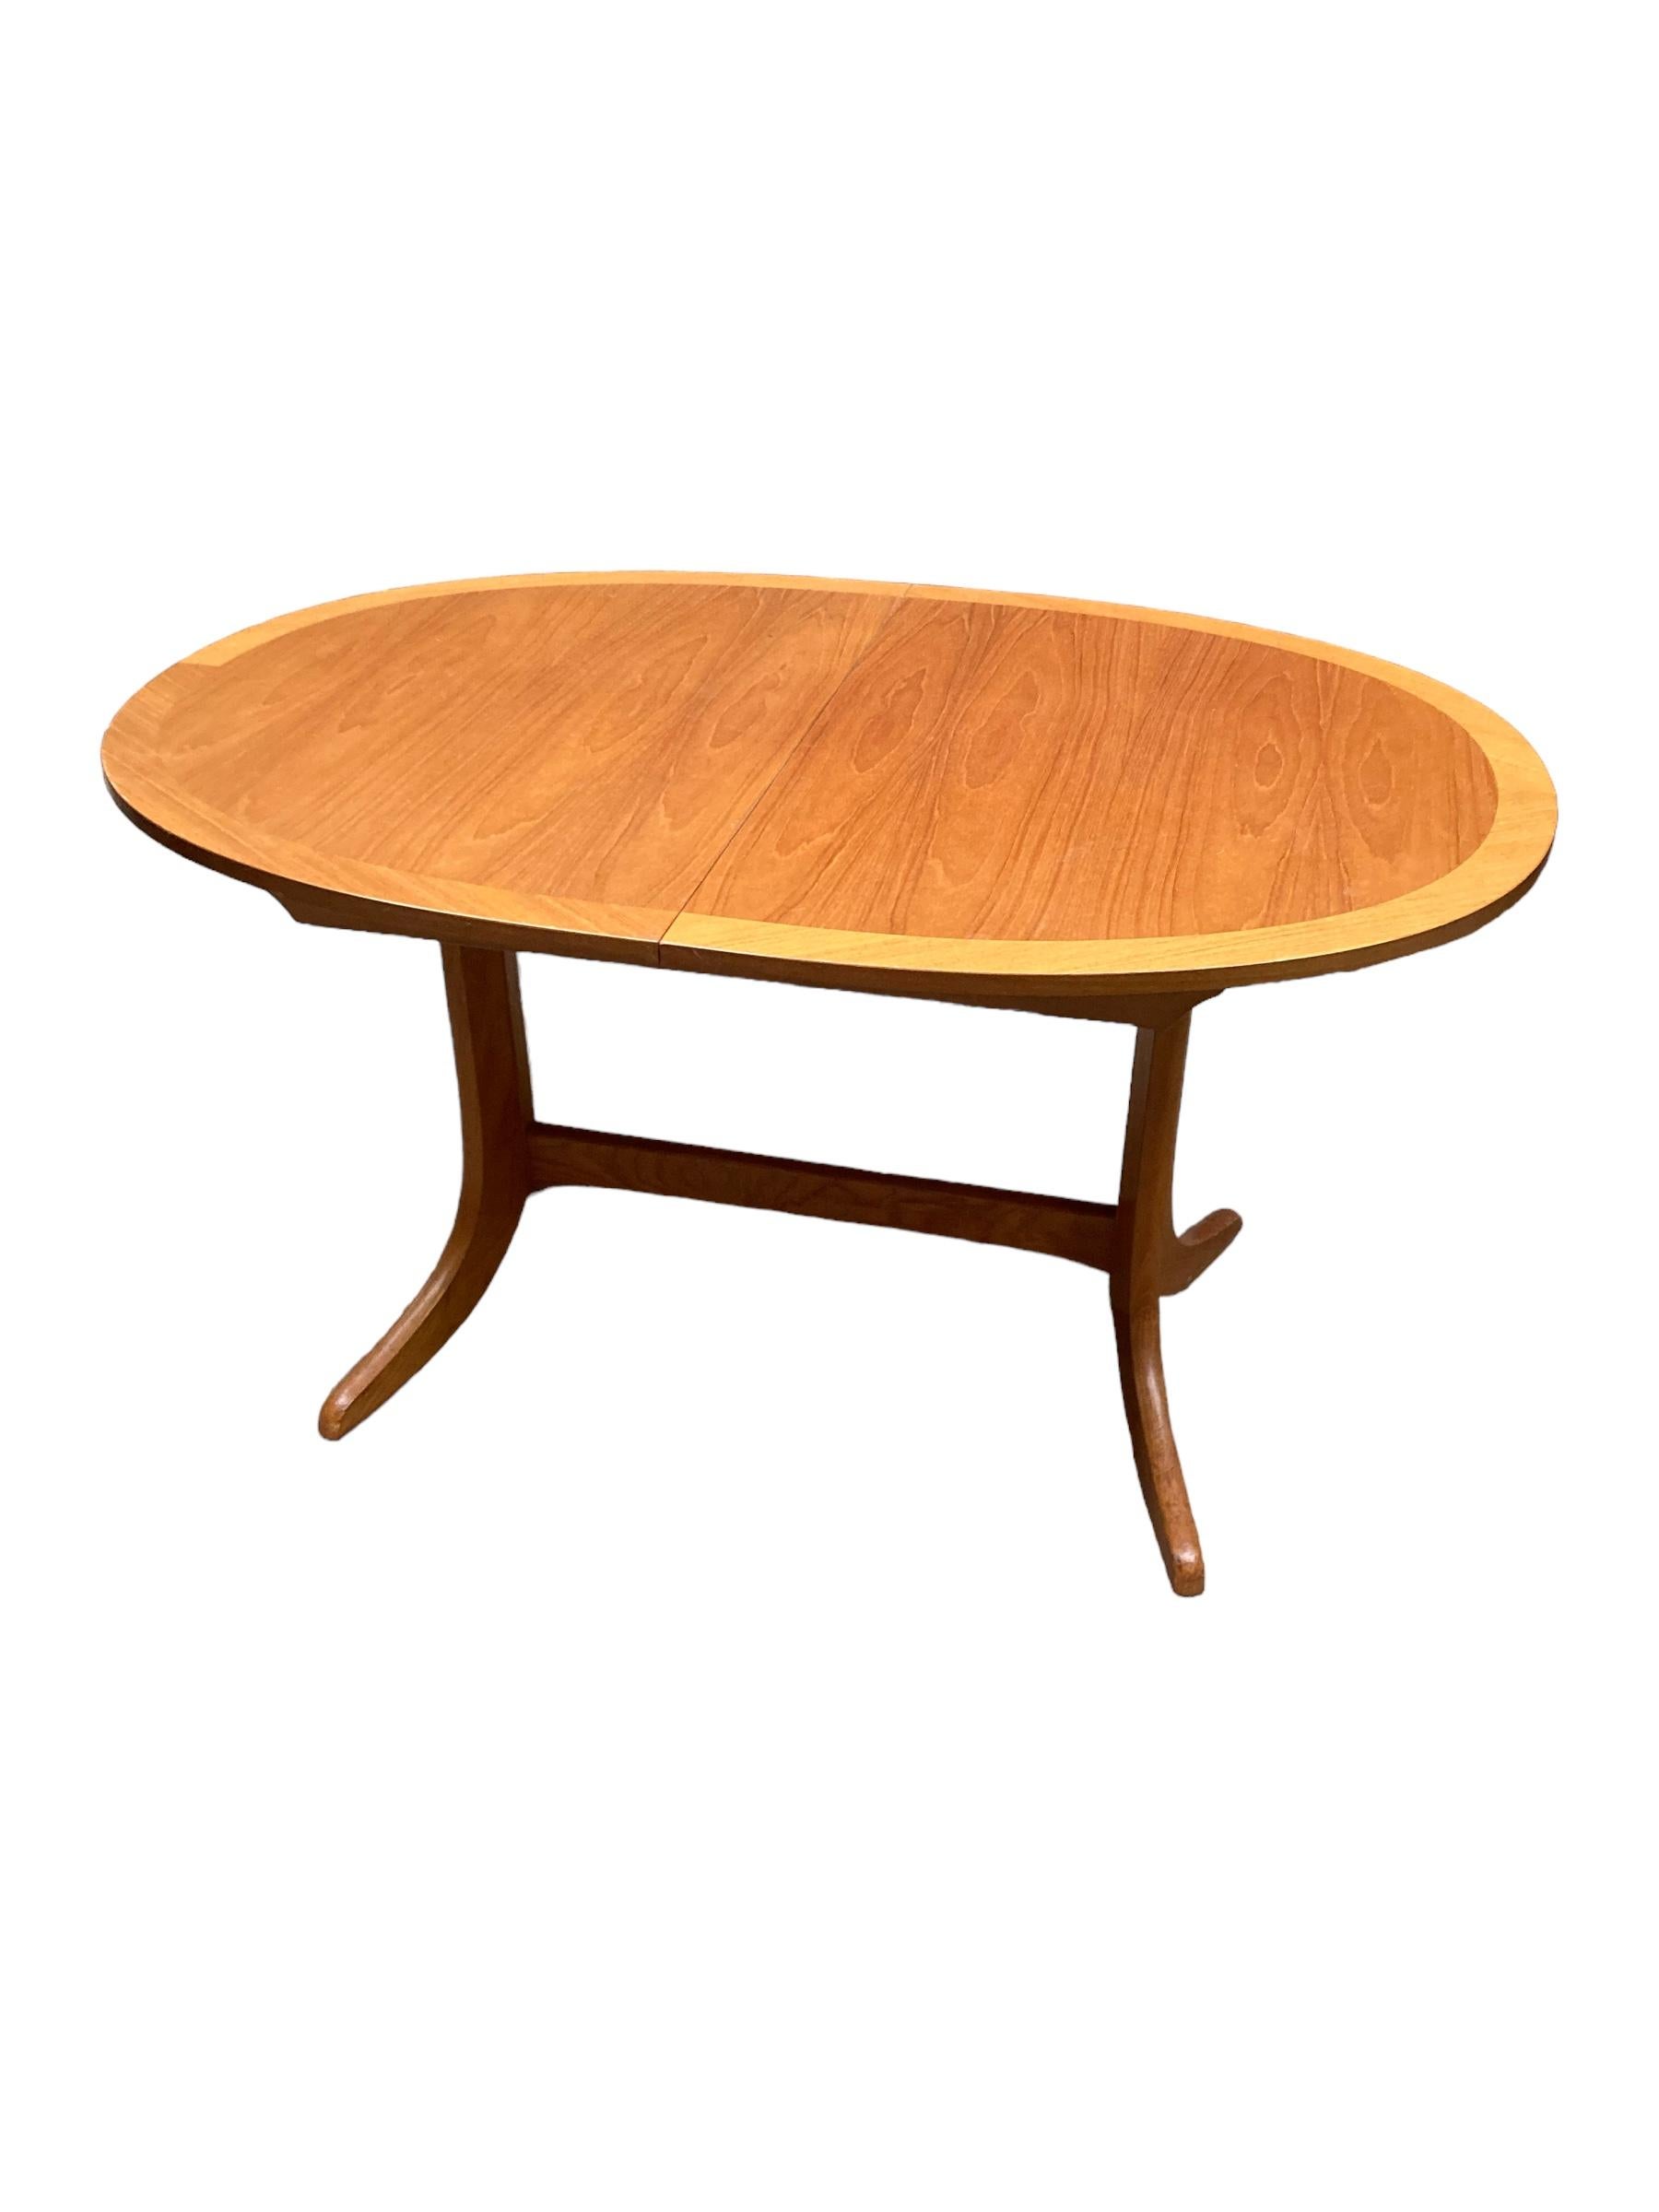 British Mid Century Extendable teak butterfly Oval dining table made by Nathan. For Sale